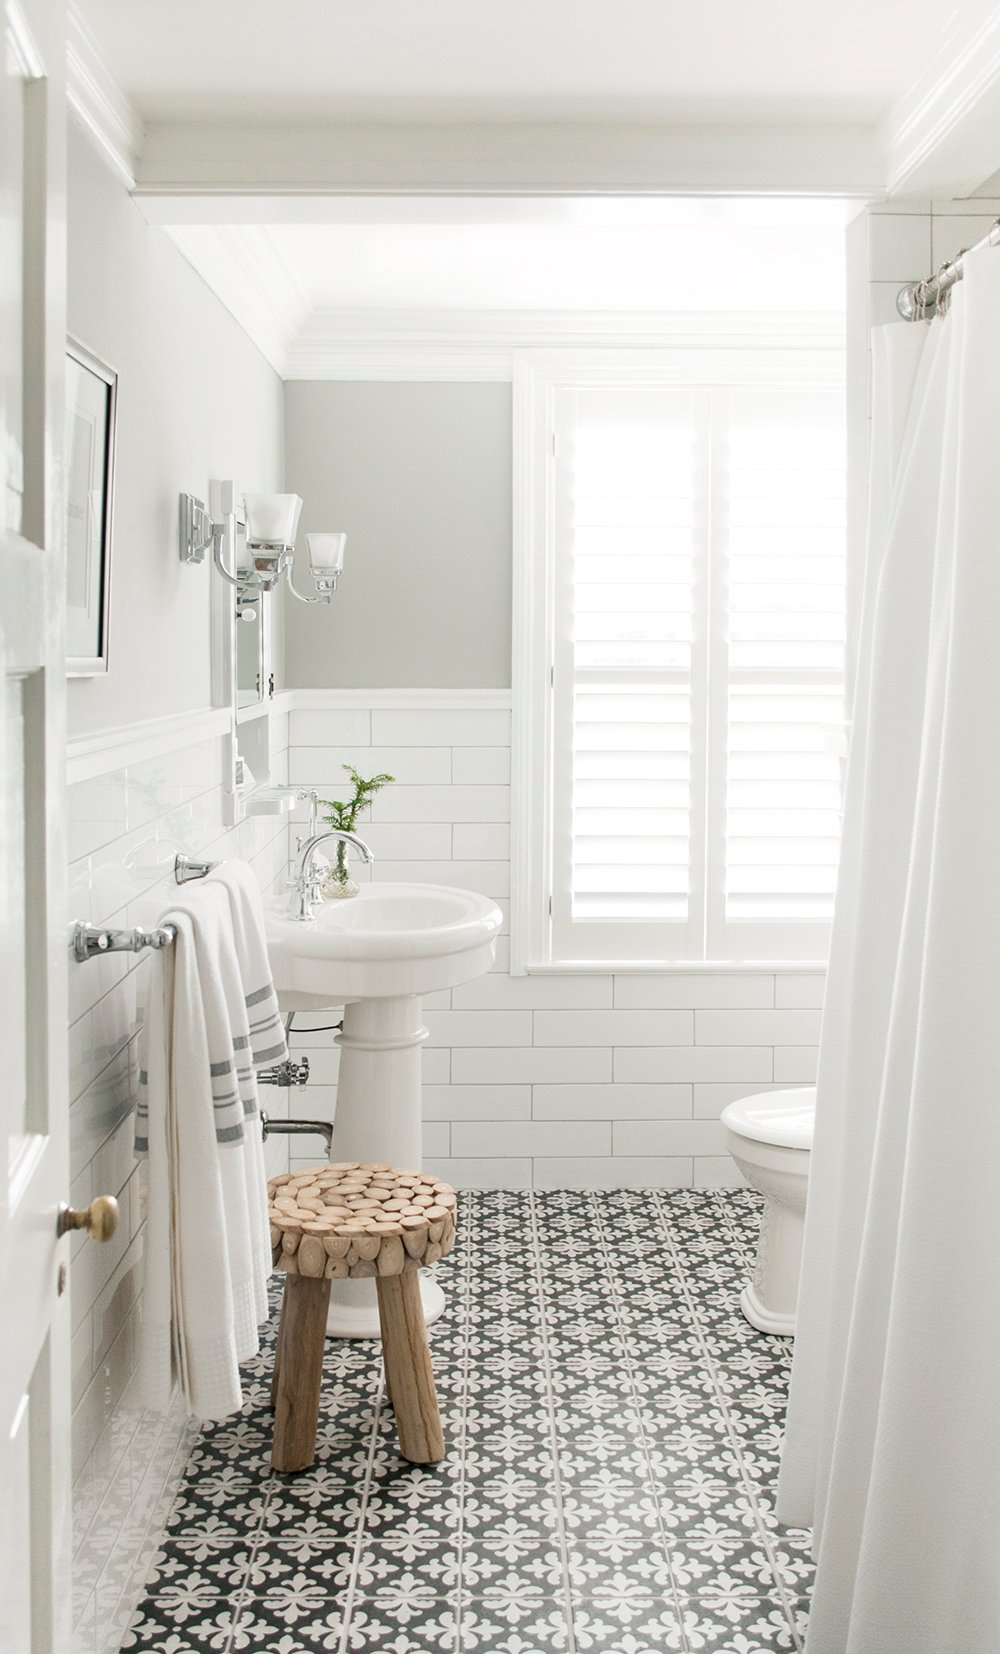 Roundup : Classic Patterned Floor Tile from Lowe's - roomfortuesday.com